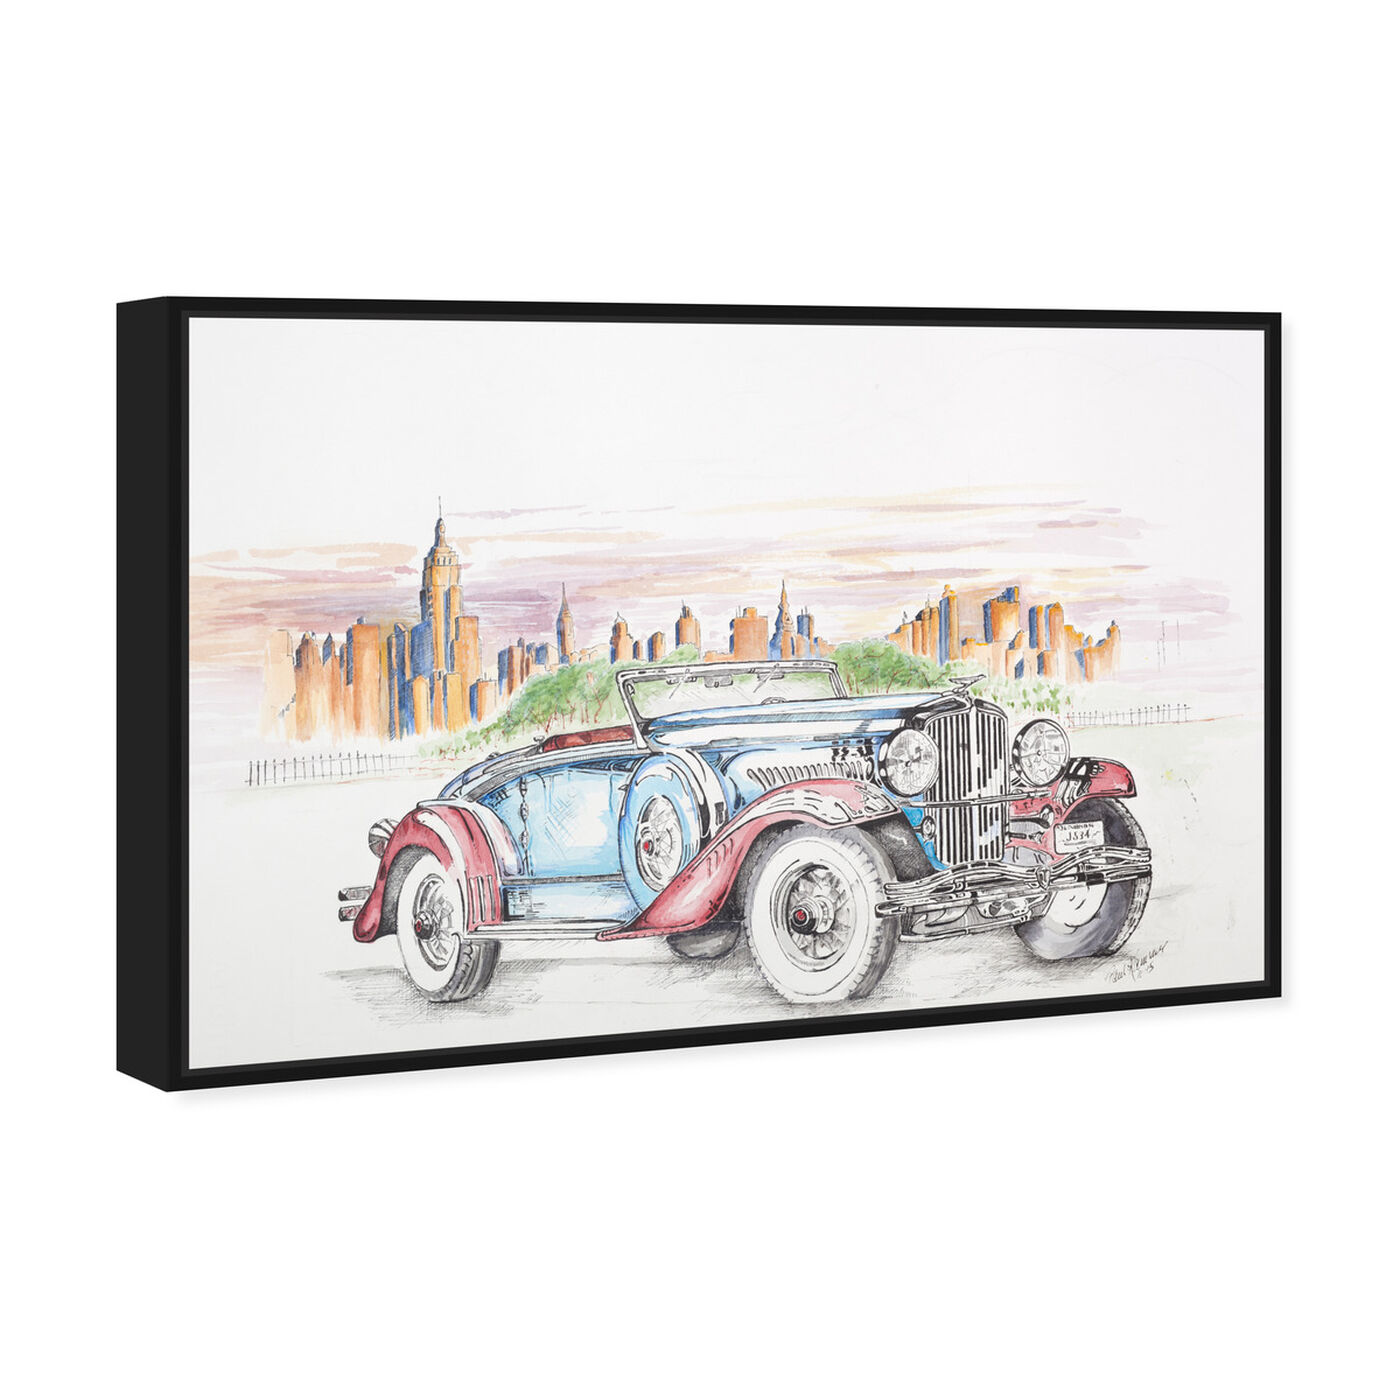 Angled view of Paul Kaminer - Hot Rod featuring transportation and automobiles art.